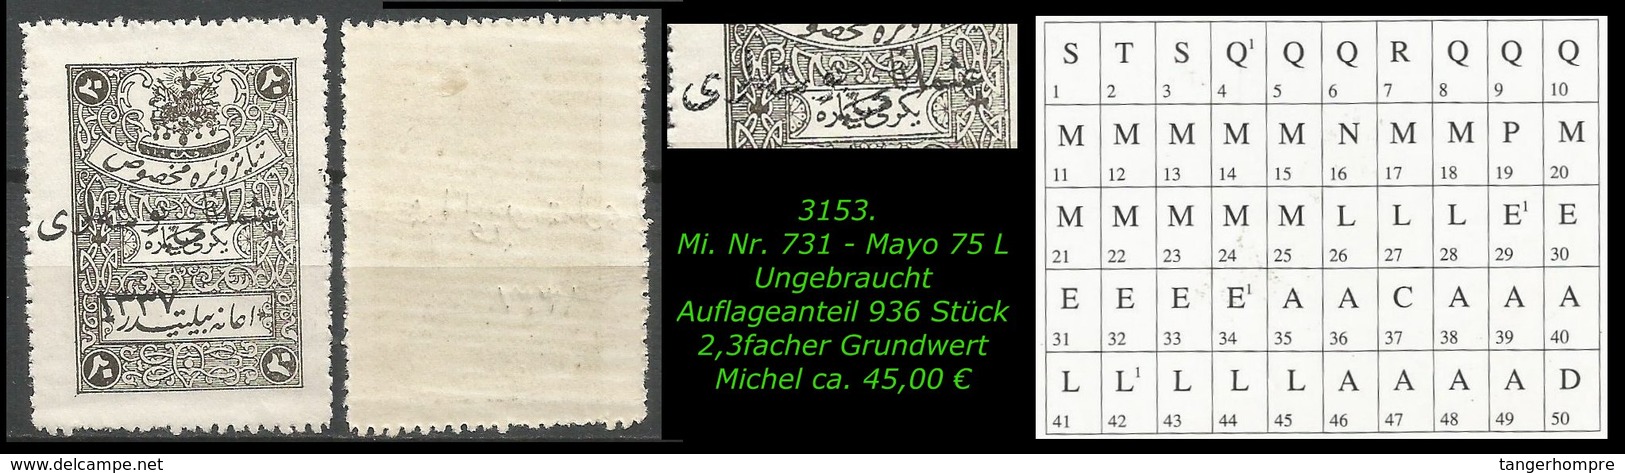 EARLY OTTOMAN SPECIALIZED FOR SPECIALIST, SEE...Mi. Nr. 731 - Mayo 75 L -R- In Ungebraucht - Ongebruikt